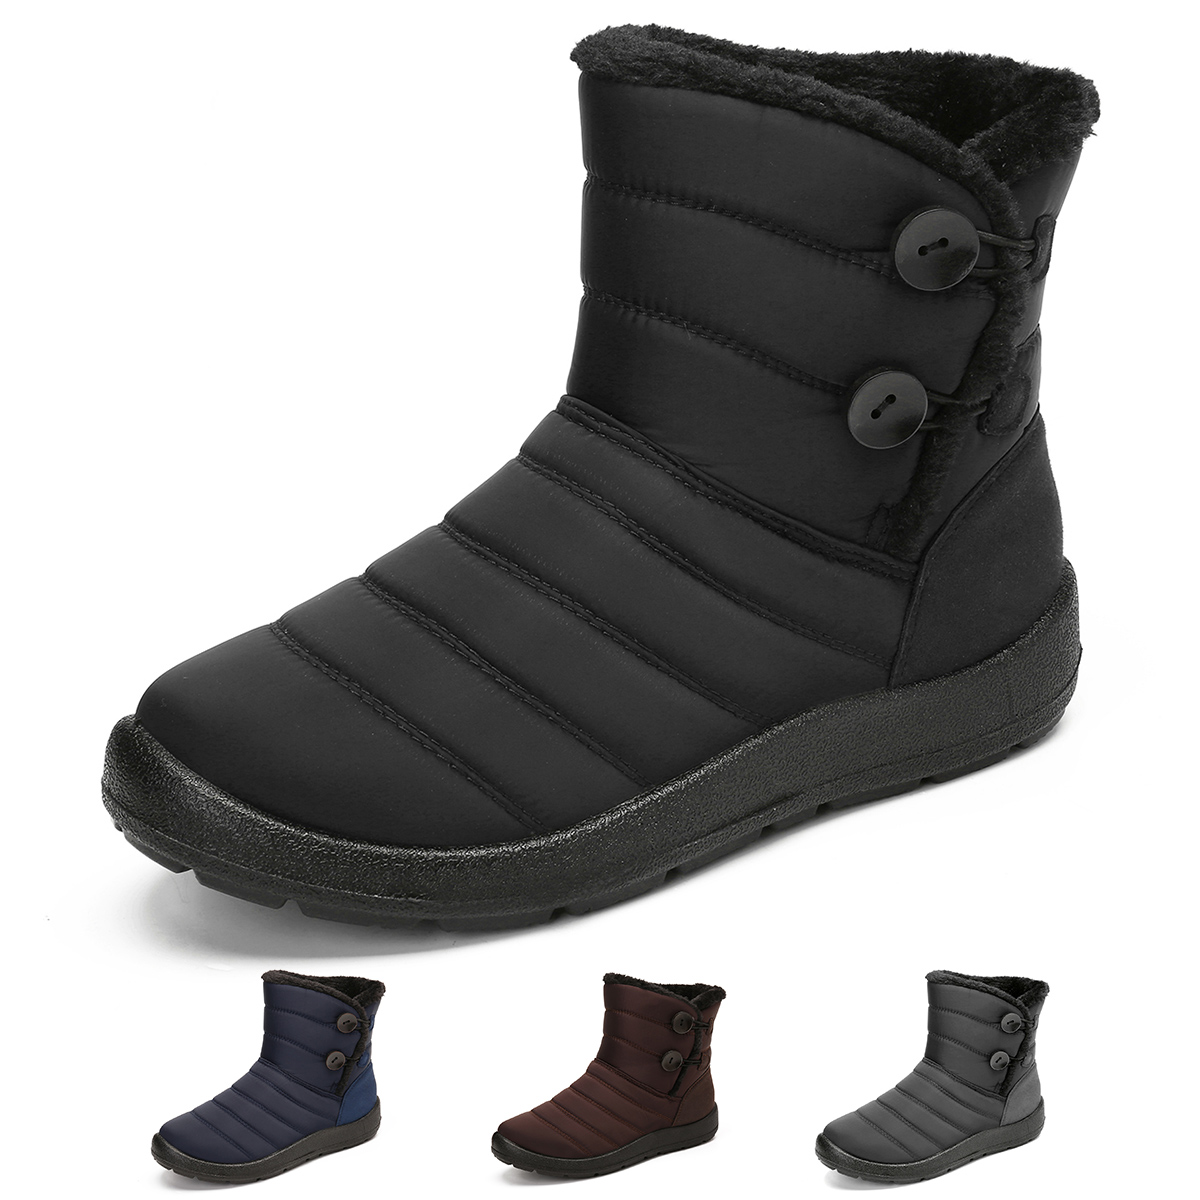 gracosy Winter Snow Ankle Boots Fur Lining Waterproof Outdoor Slip On Booties Sneakers for Men and Women